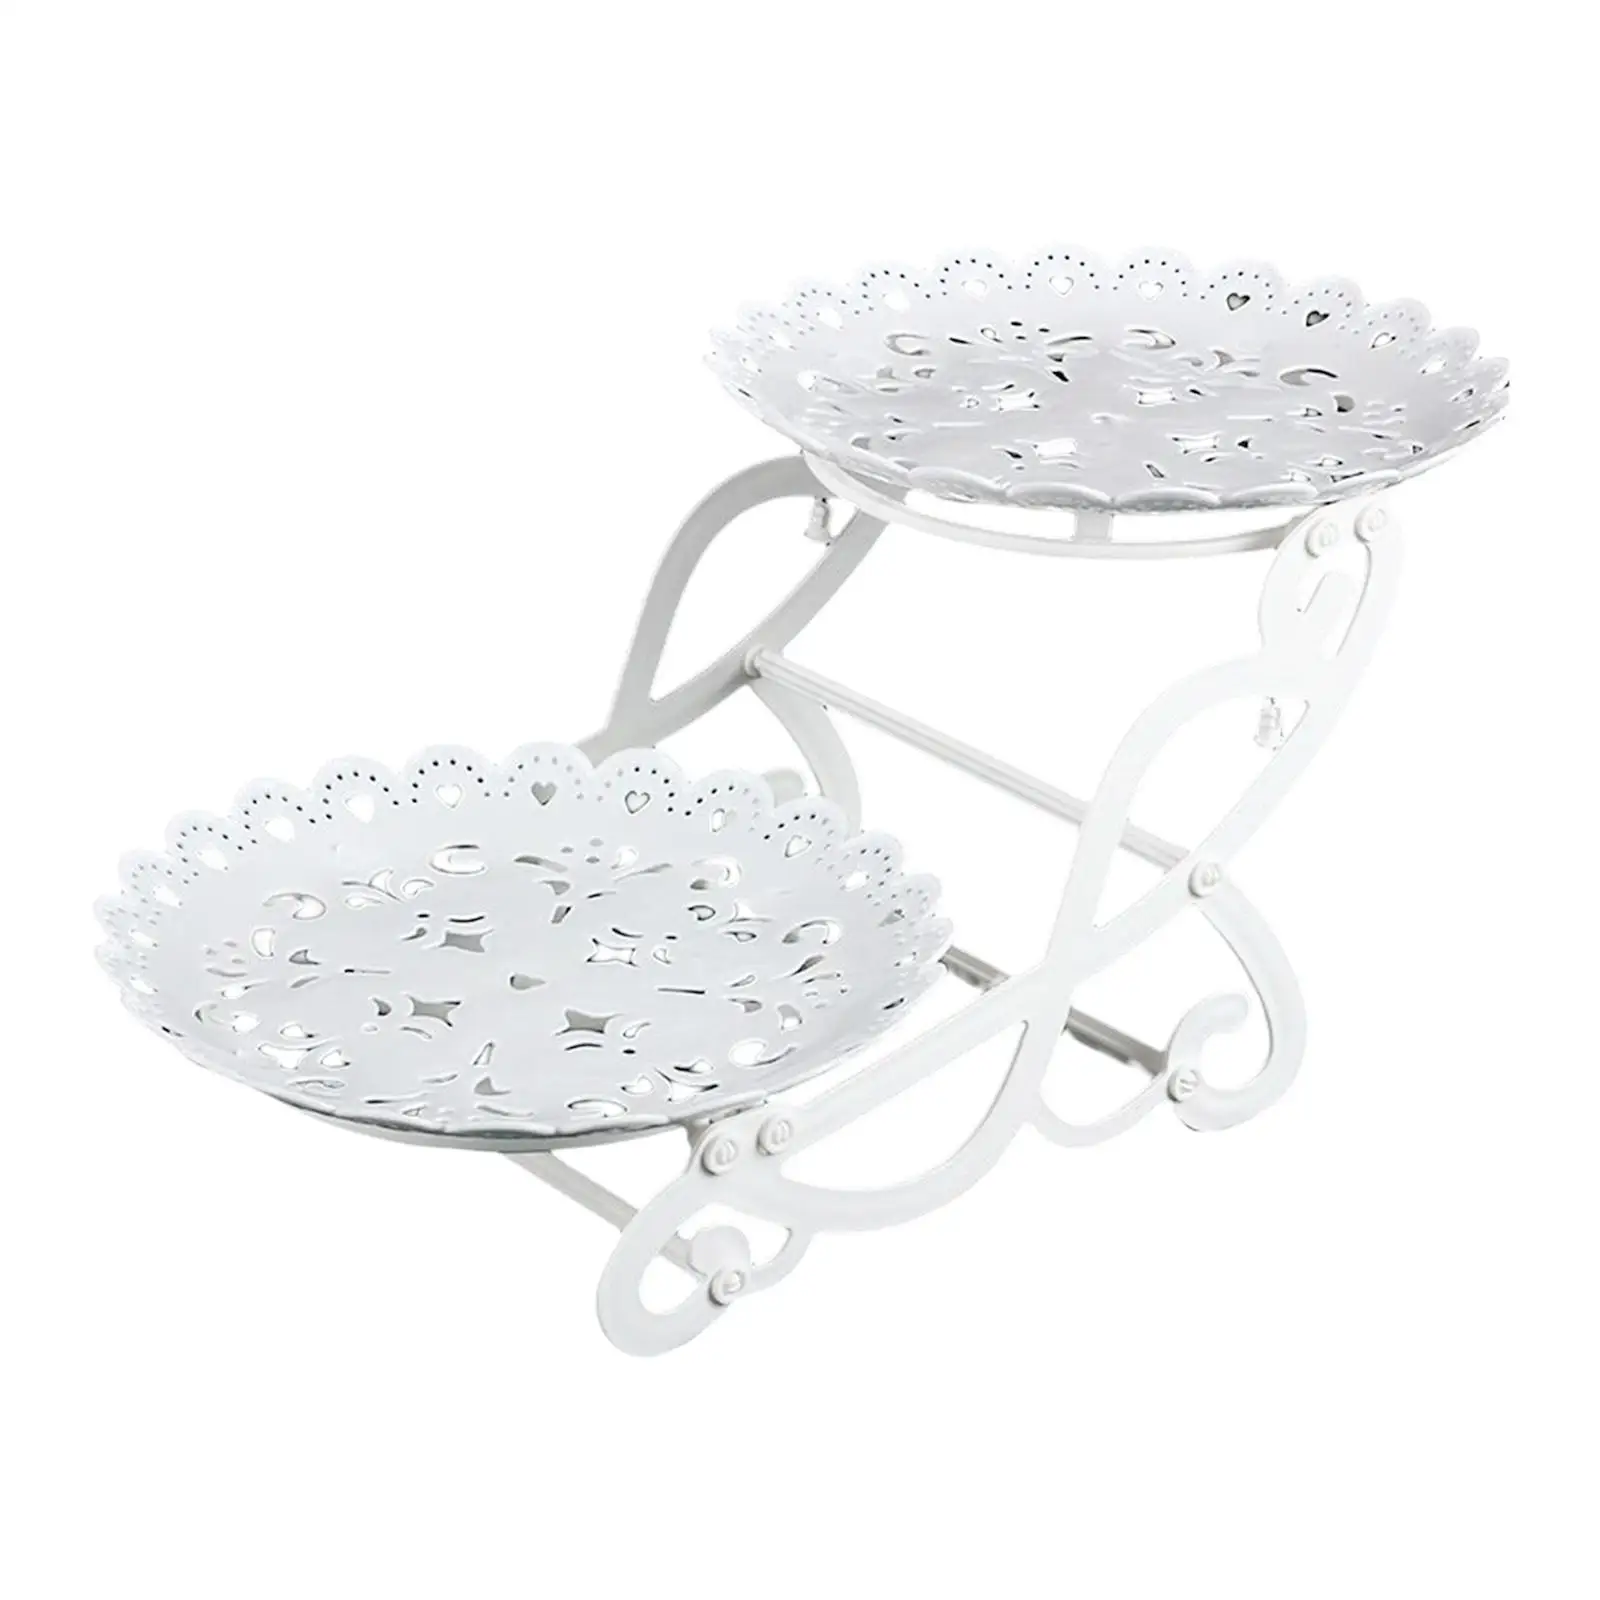 Cake Stand Dessert Serving Plate Appetizer Tray for Cupcake Afternoon Tea